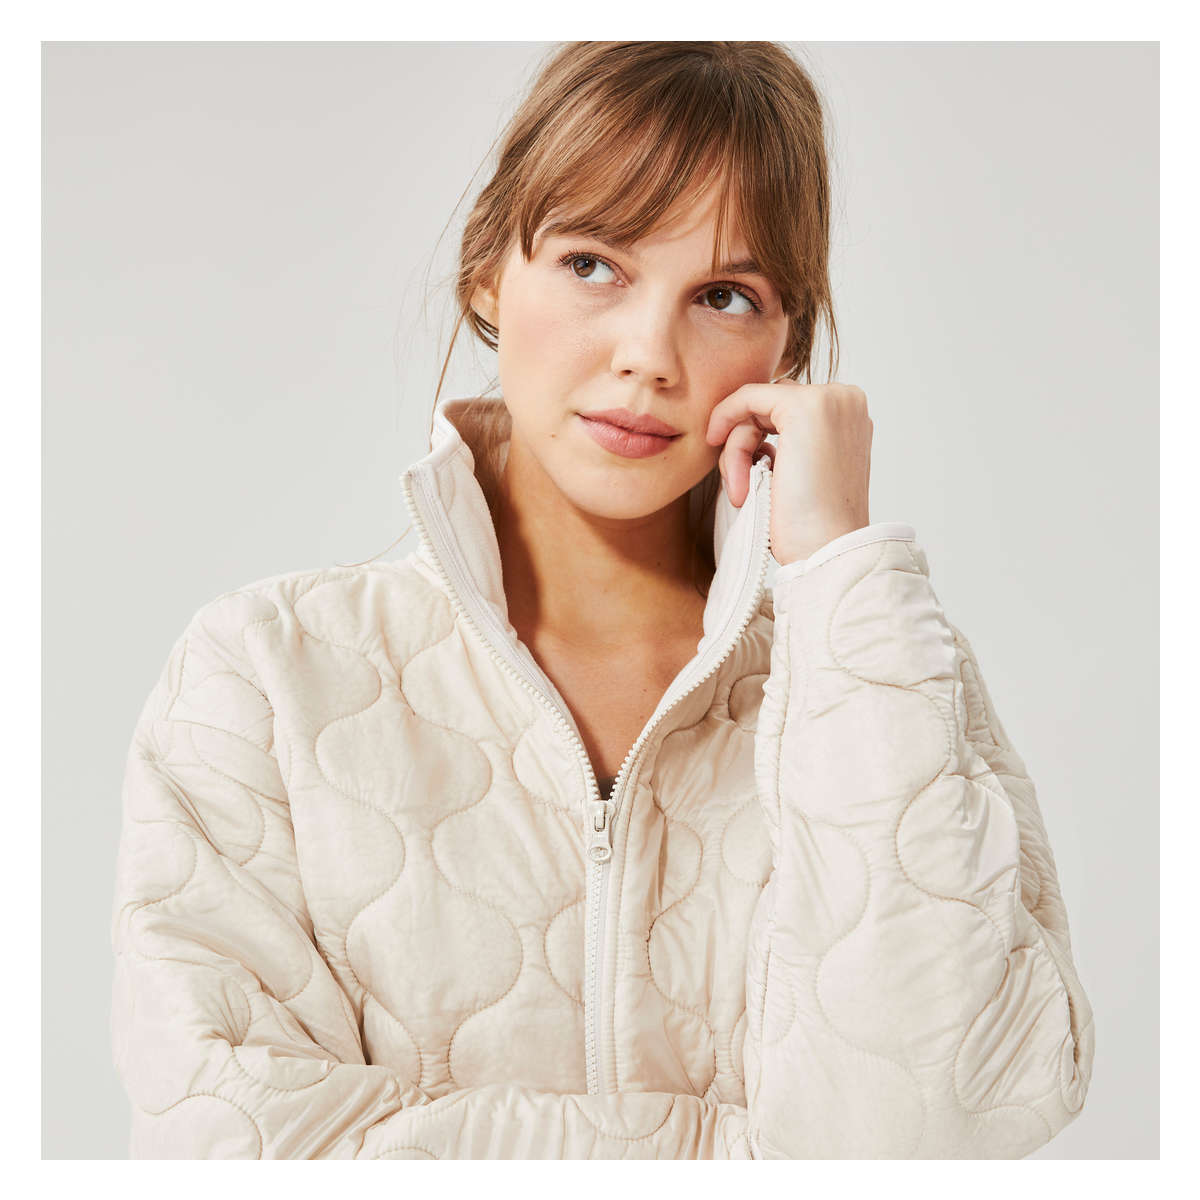 Quilted Jacket in Beige from Joe Fresh